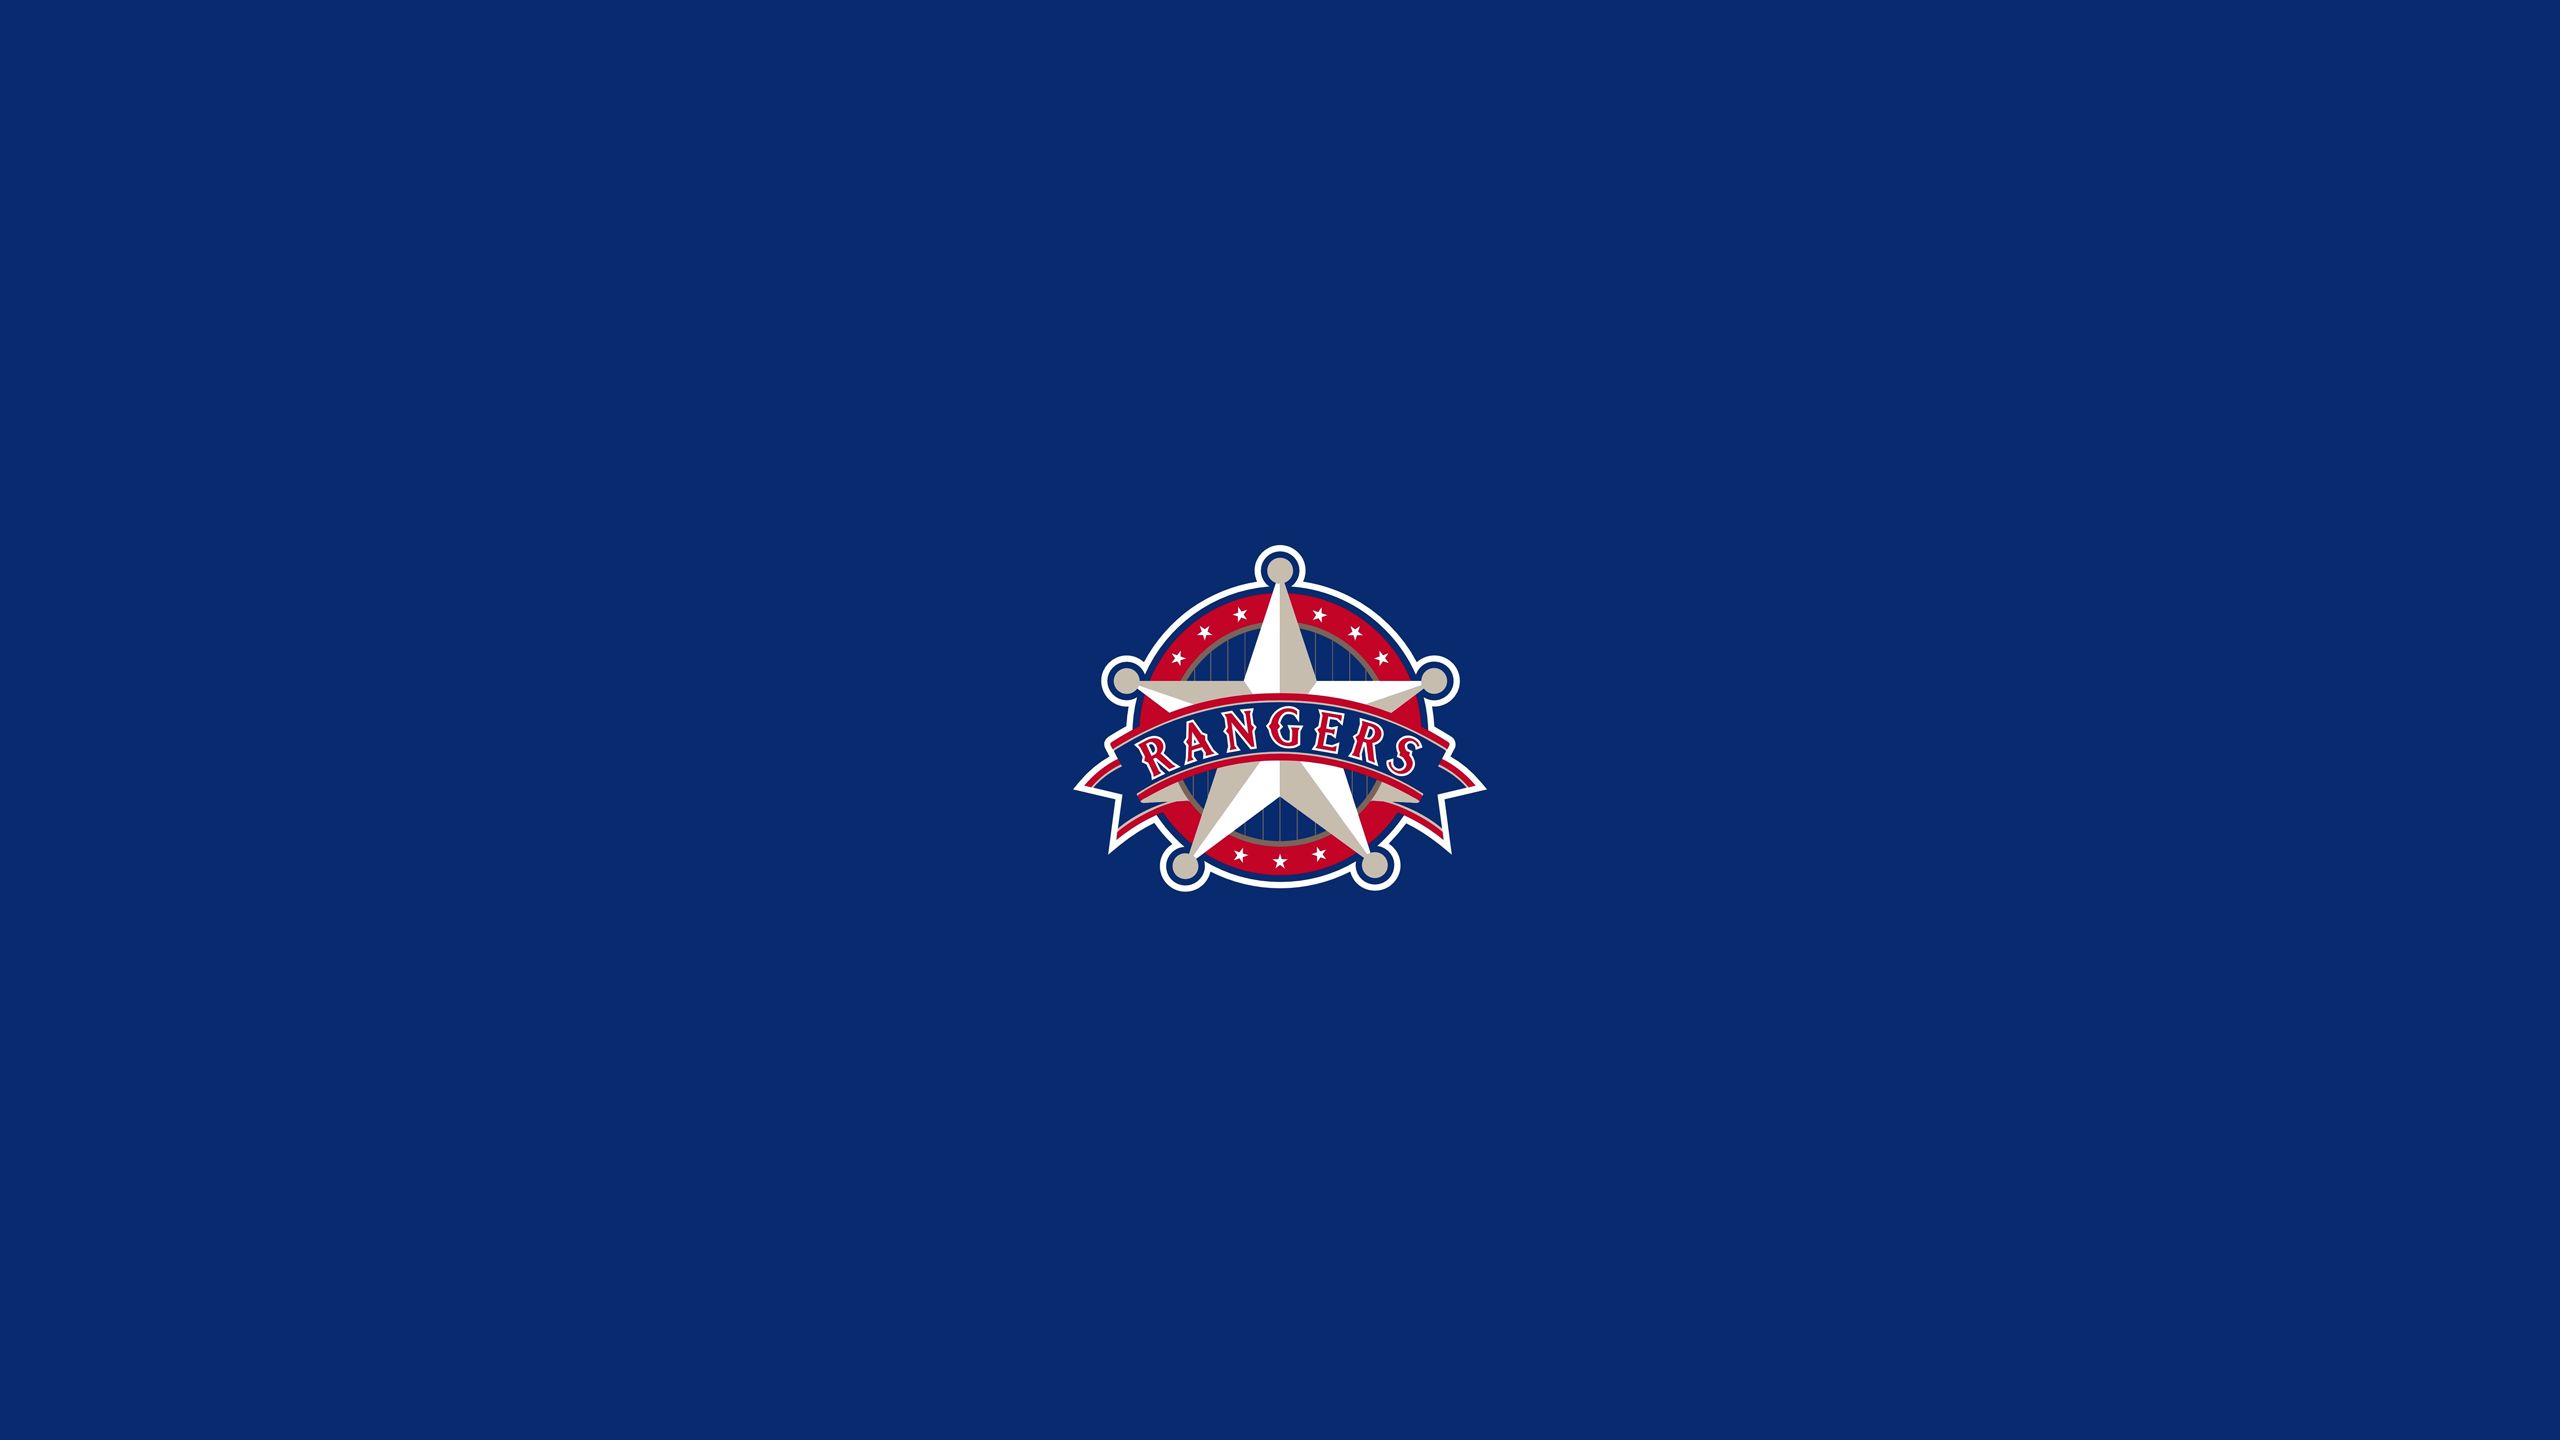 Download Texas Rangers wallpapers for mobile phone, free Texas